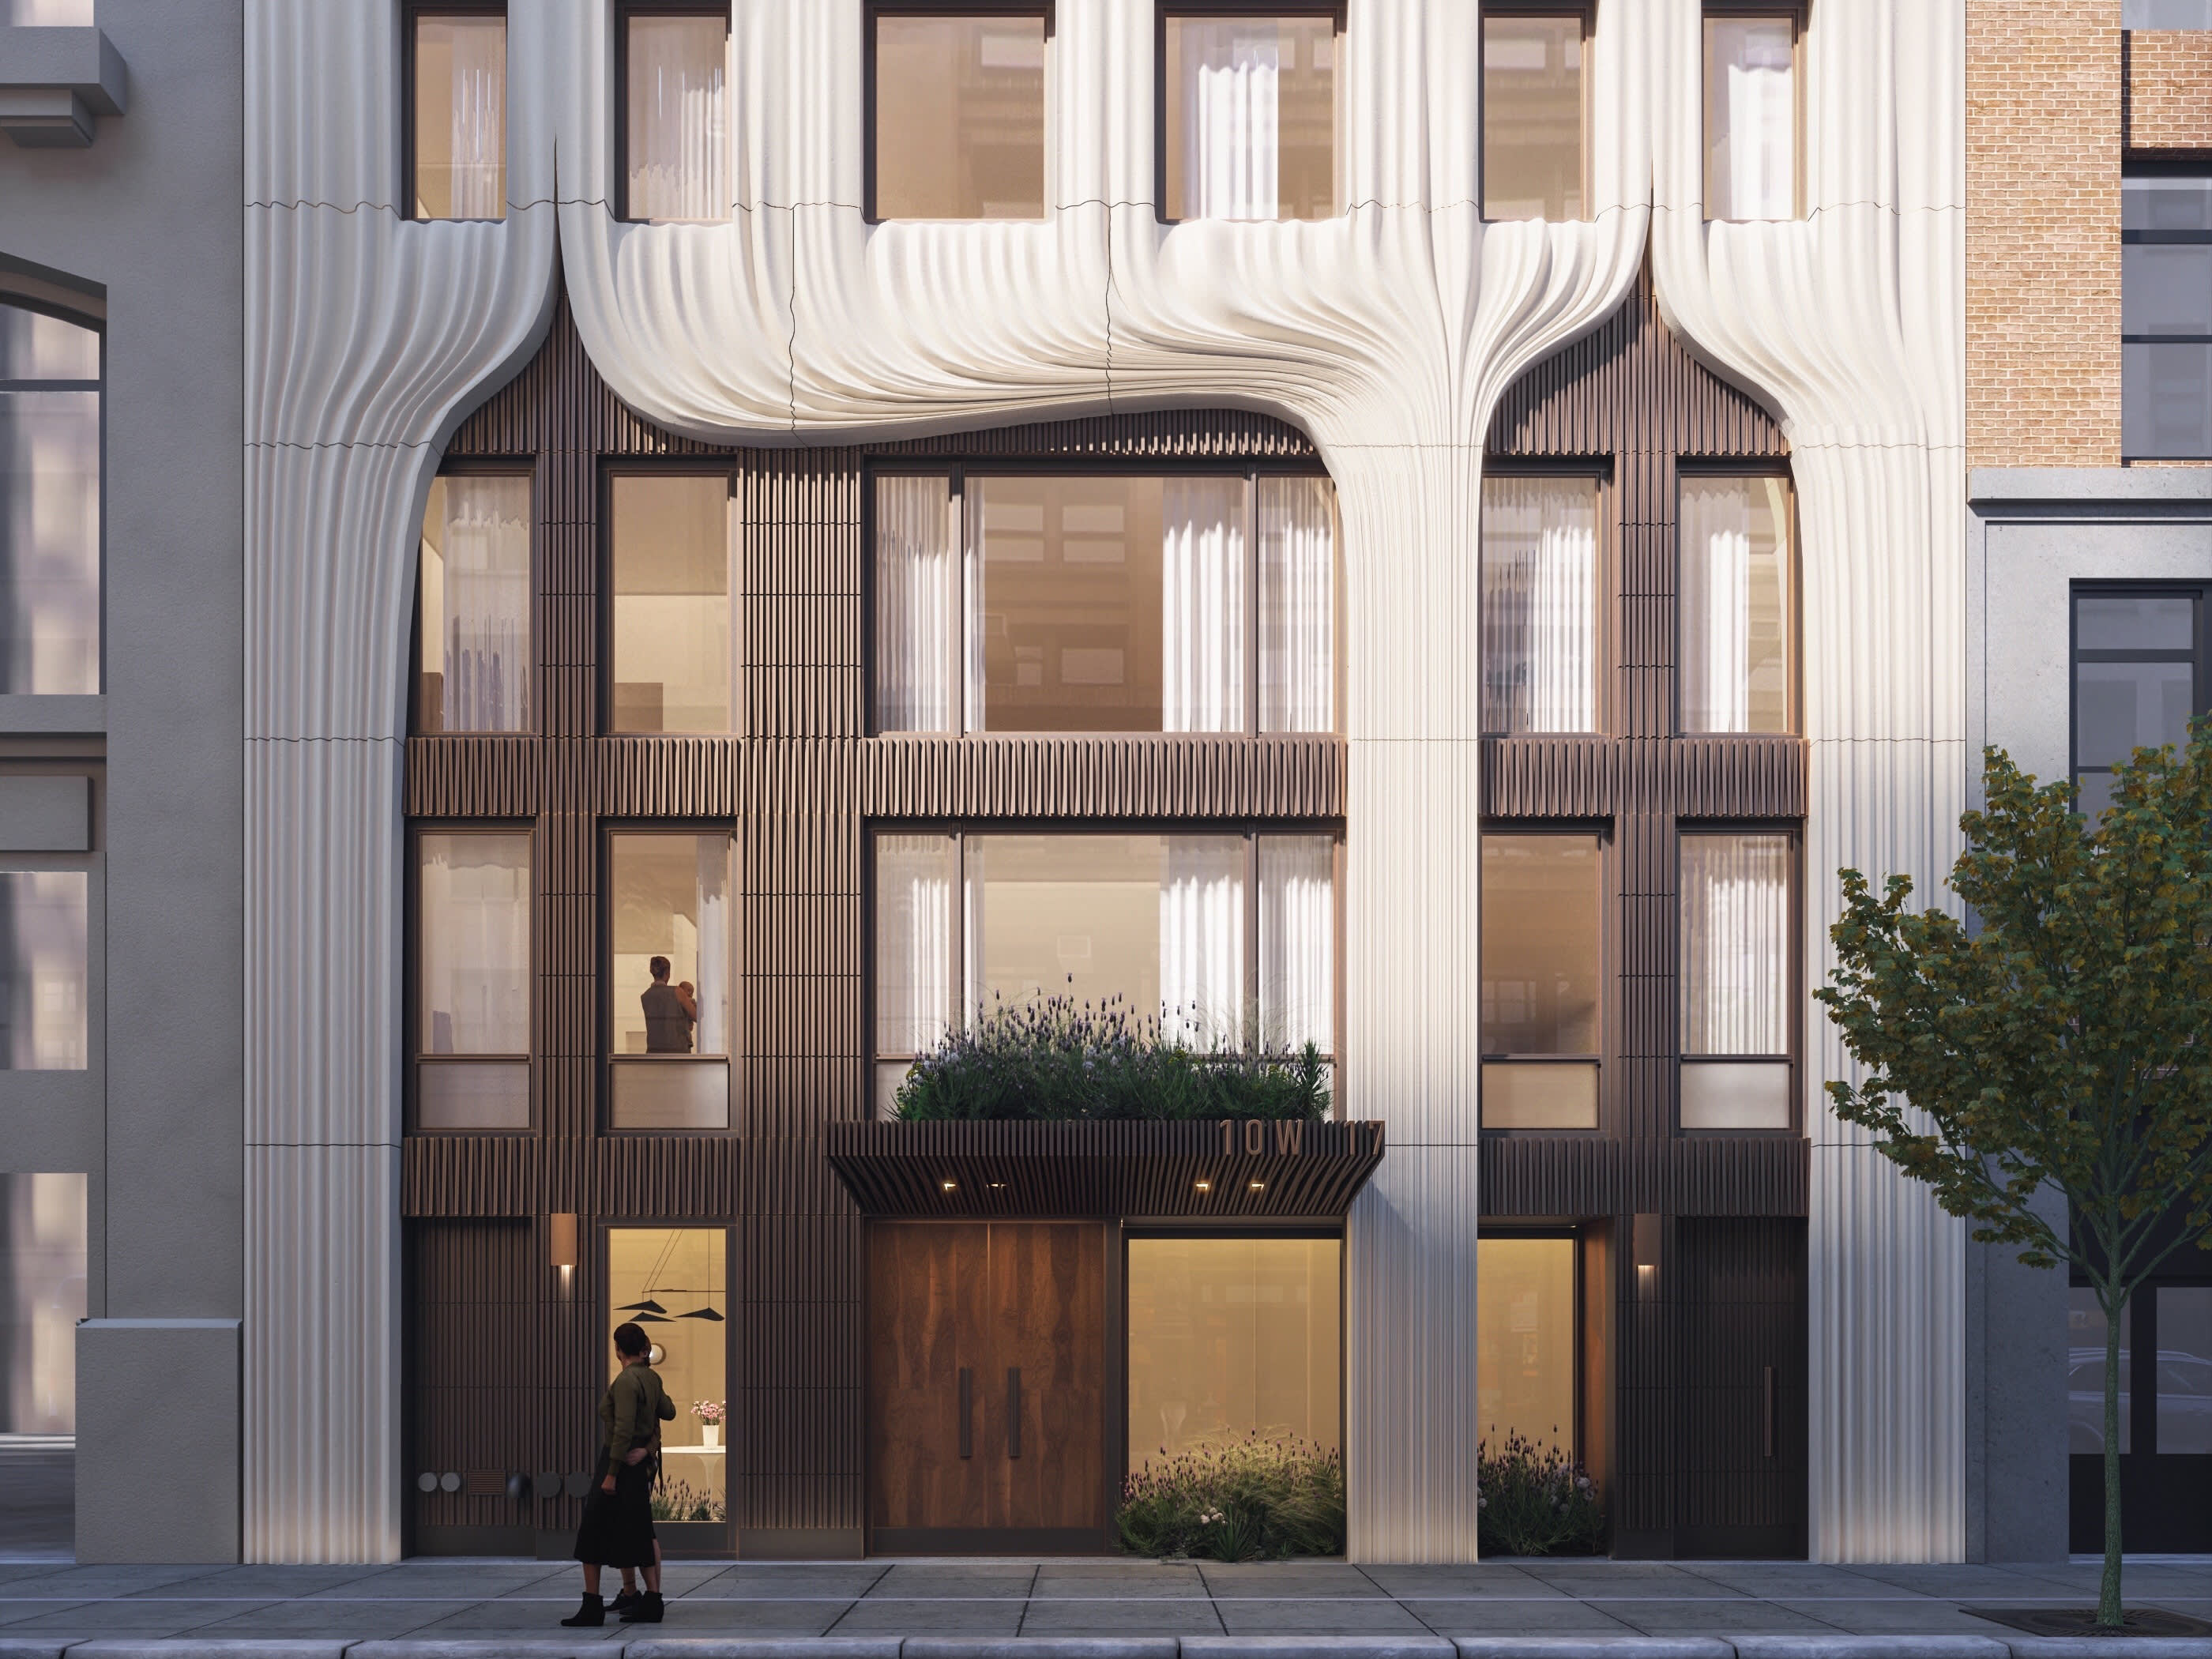 Ladies’ Mile condo designed by DXA Studio features a draping fabric-like facade